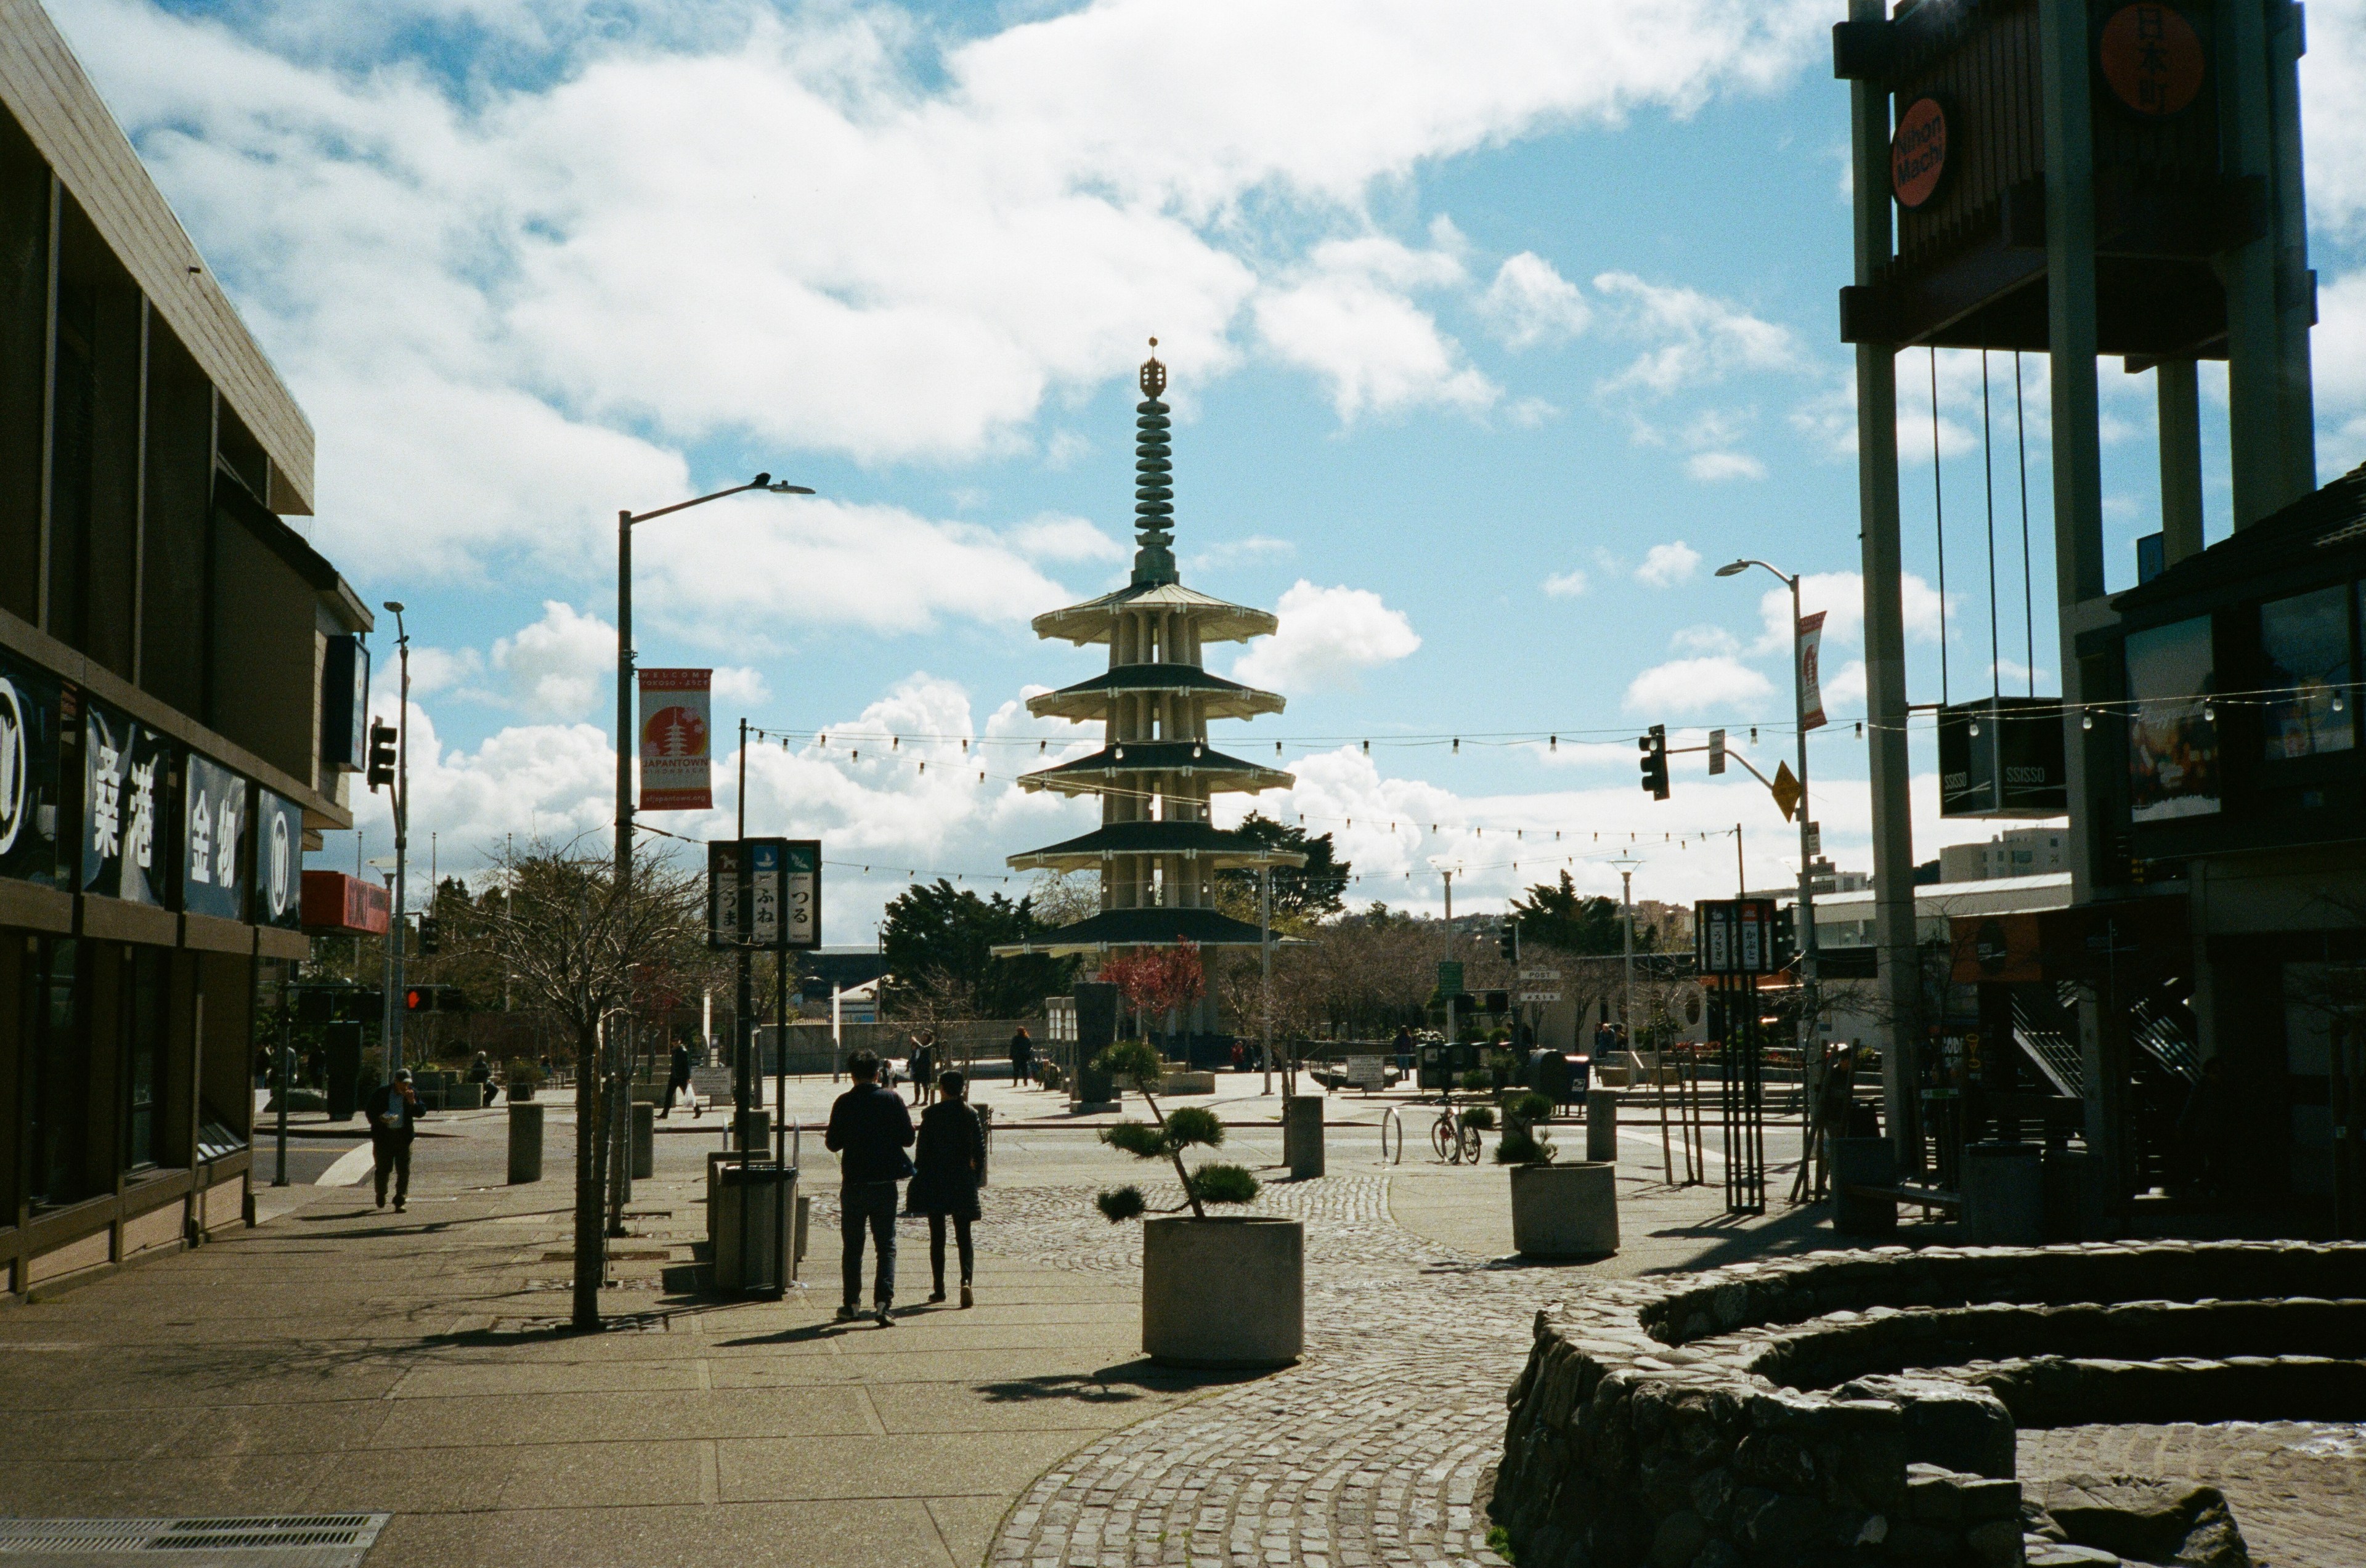 San Francisco Japantown's Osaka Way with the Pease Plaza in the background.